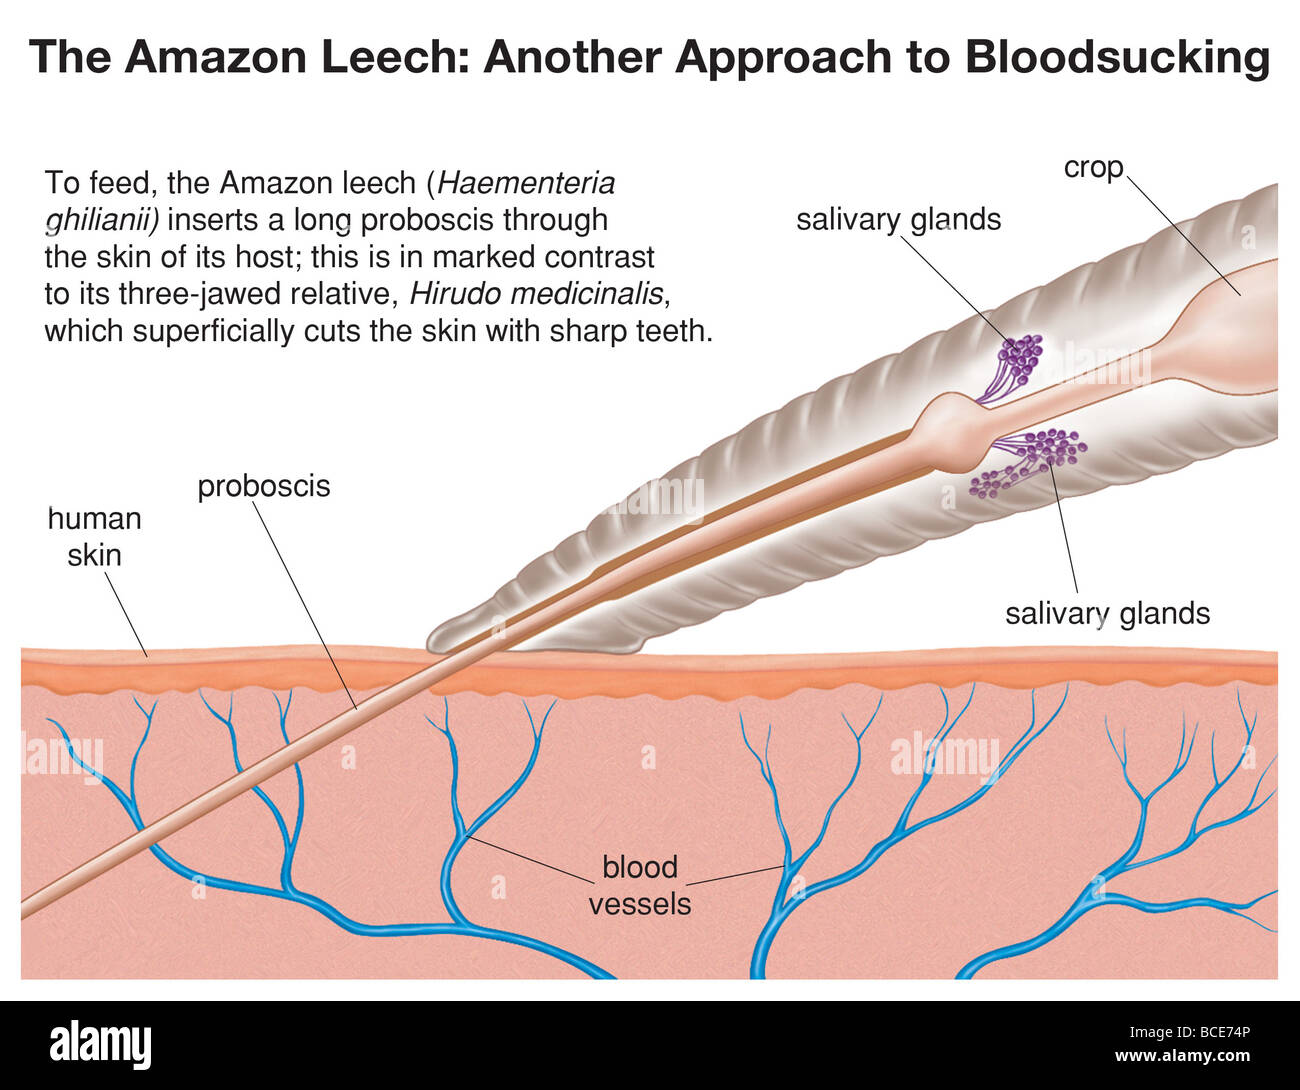 To feed, the Amazon leech inserts a long proboscis through the skin of its host. Stock Photo